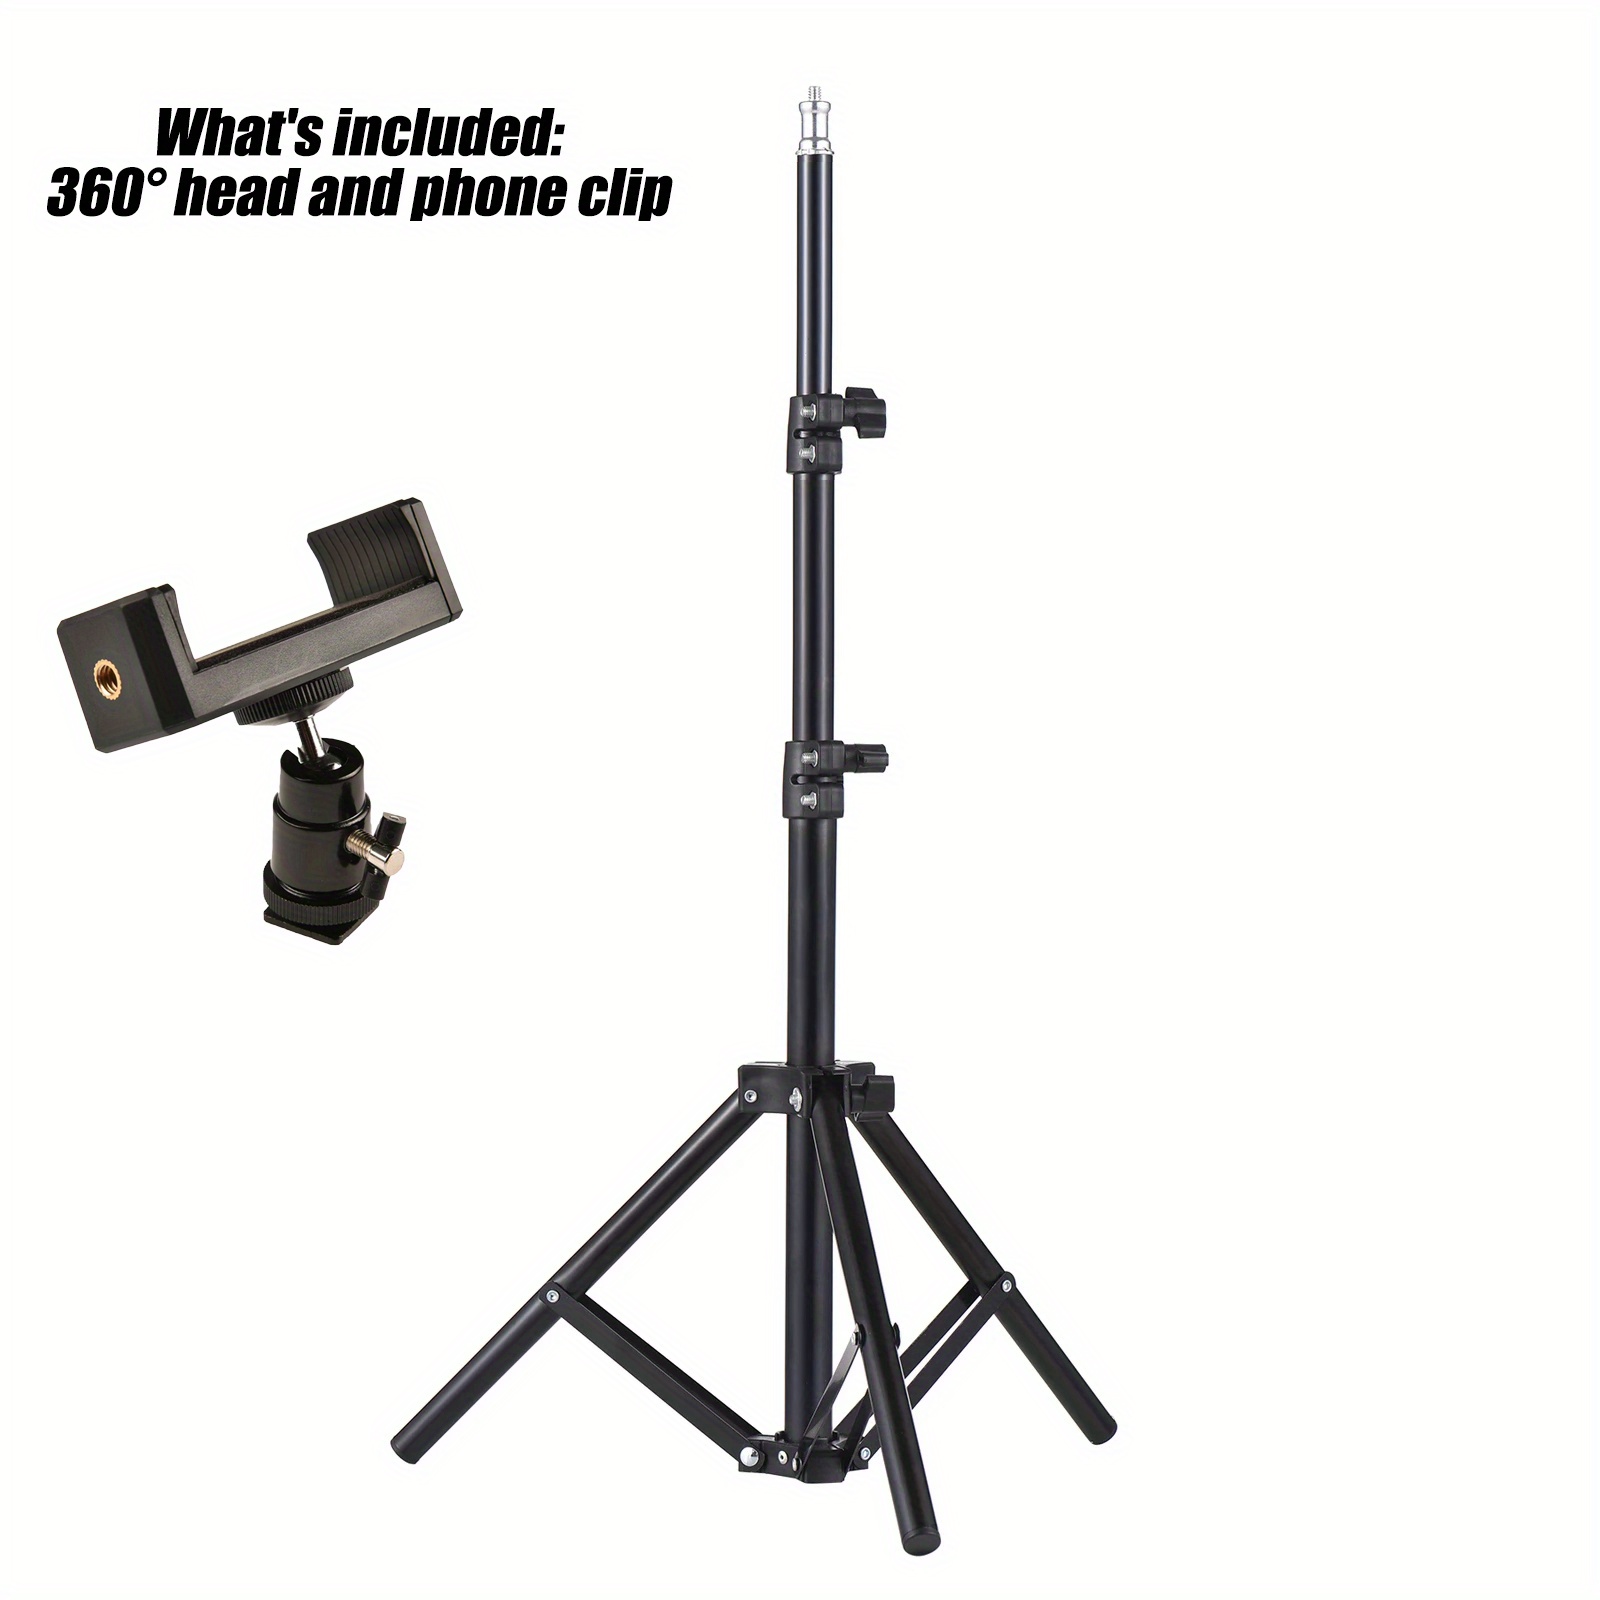 

Adjustable Aluminum Alloy Projector Tripod Stand - Portable & Stretchable Holder For Lcd Projectors, Indoor/outdoor Use, 17.3" To 47" Height